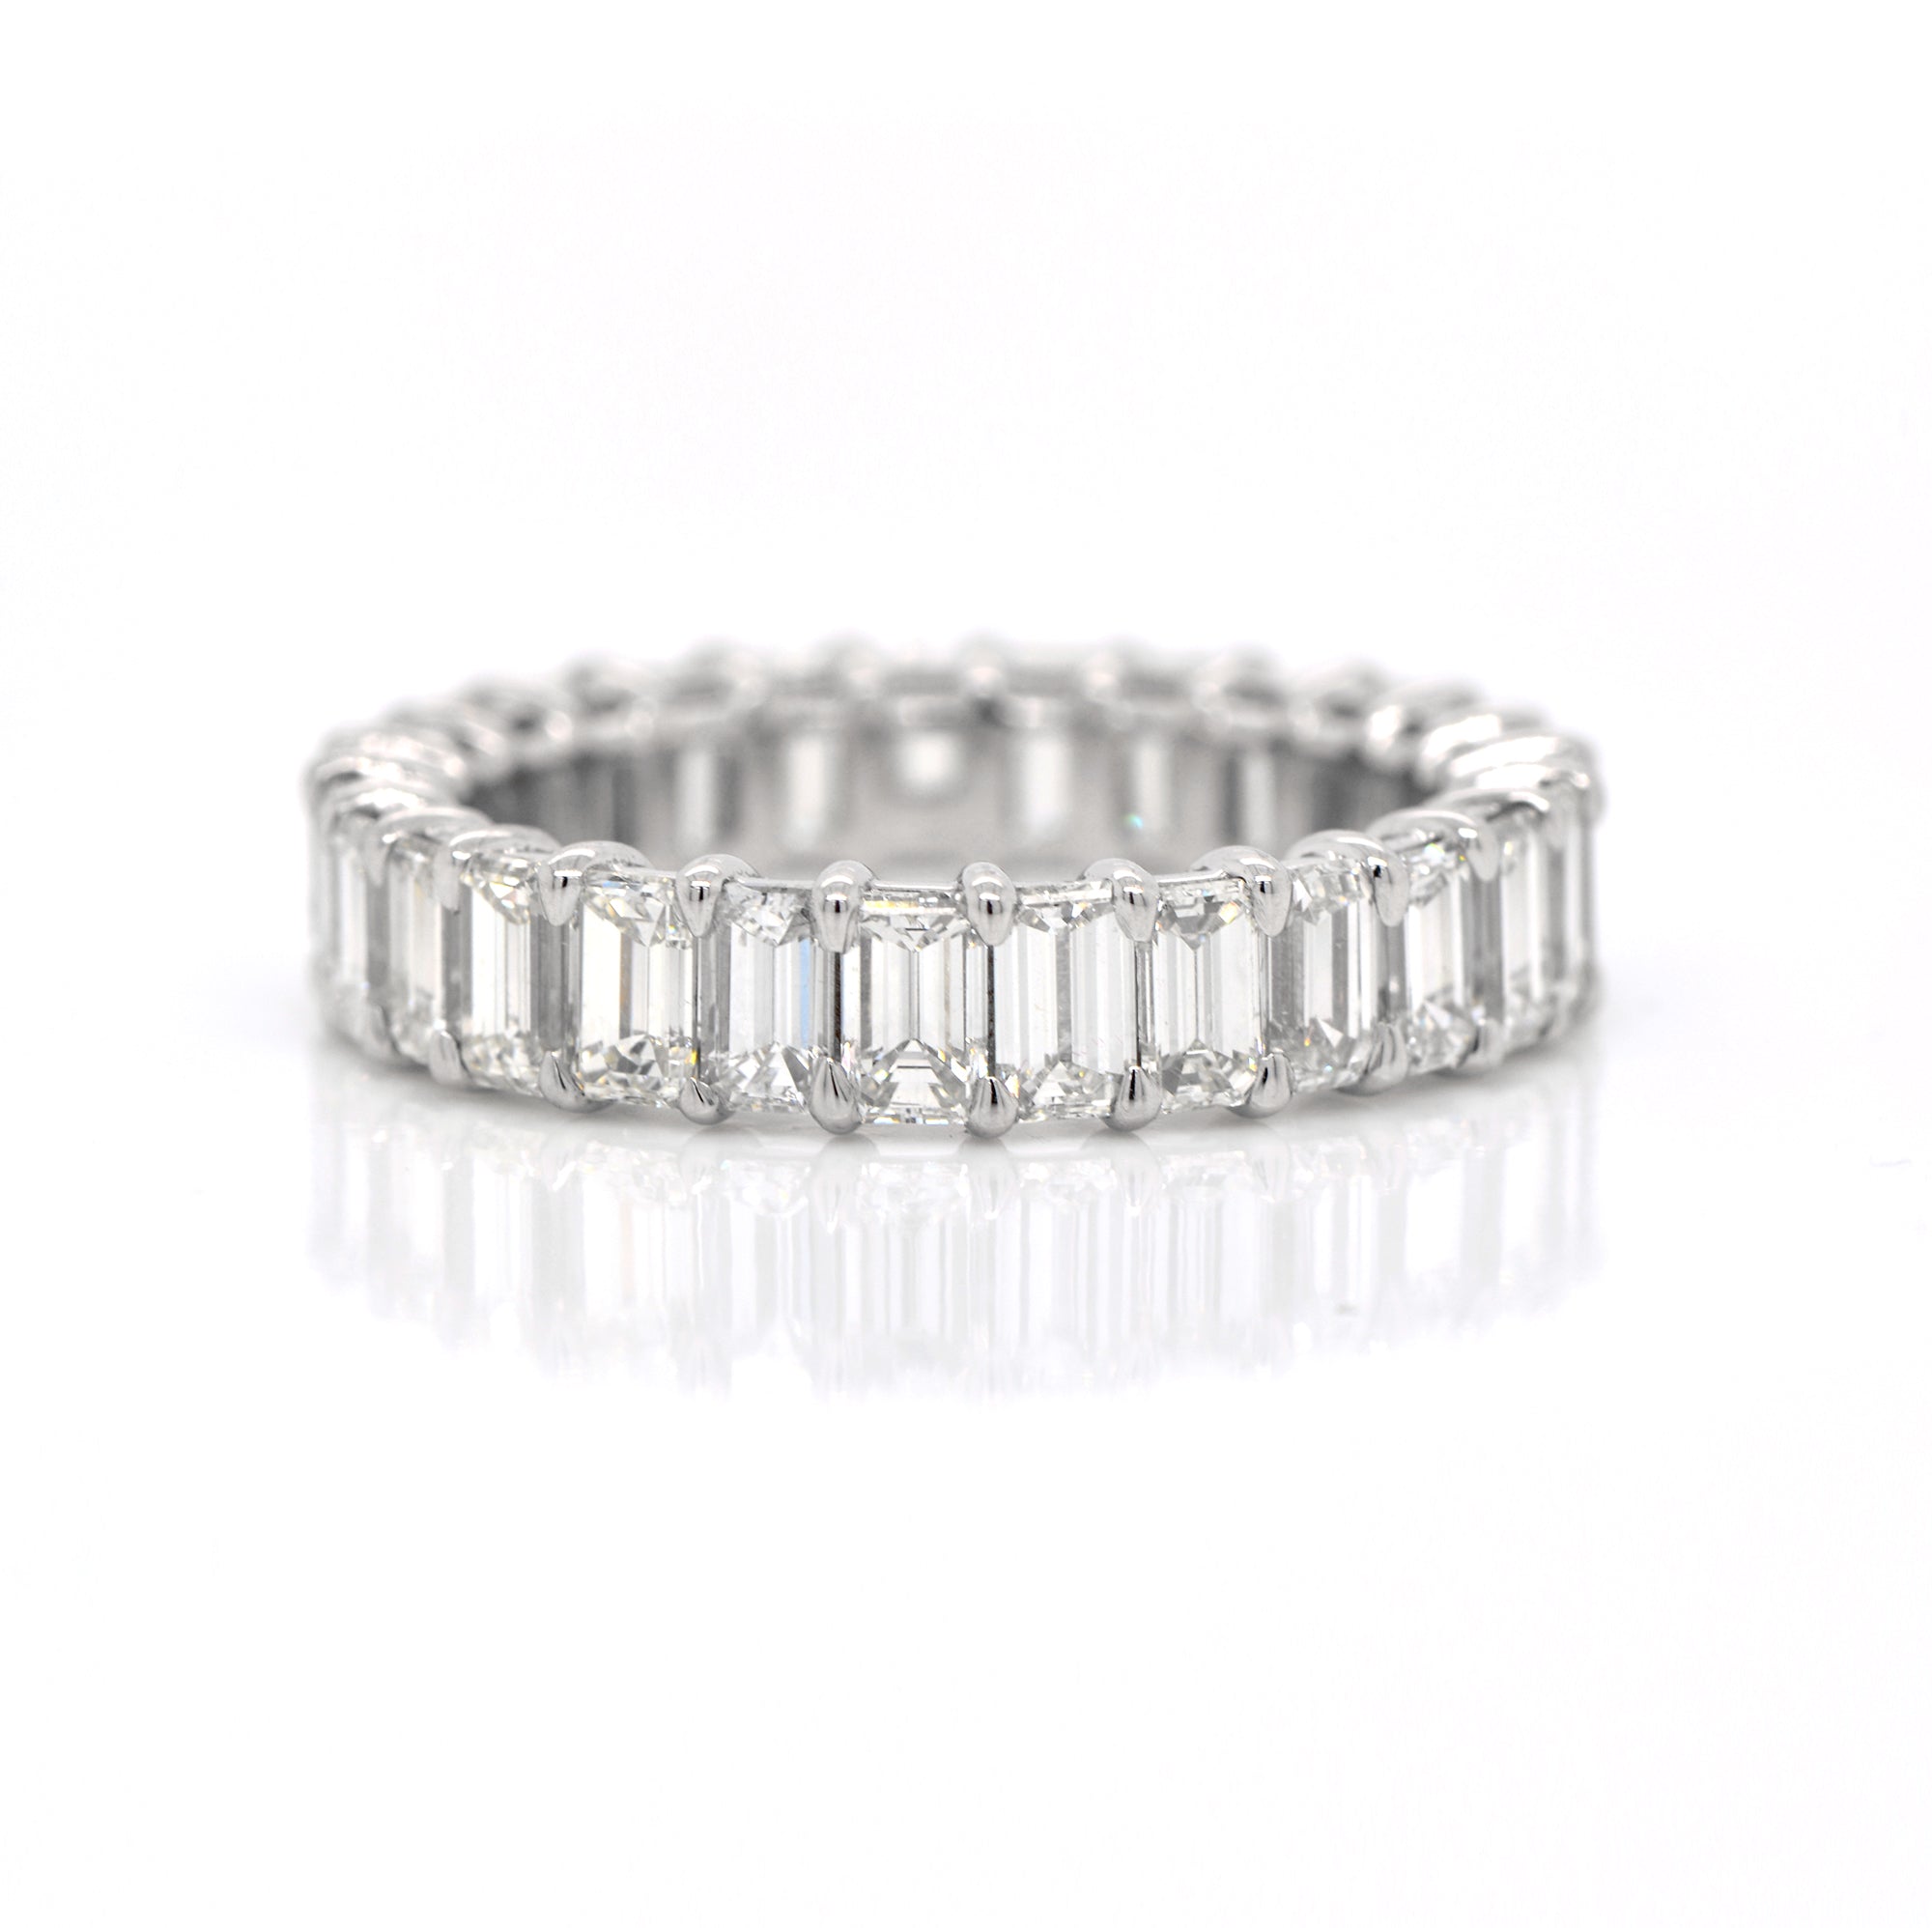 Platinum diamond eternity band featuring 27 emerald-cut diamonds (H color, VS clarity) weighing a total of 4.26 carats.